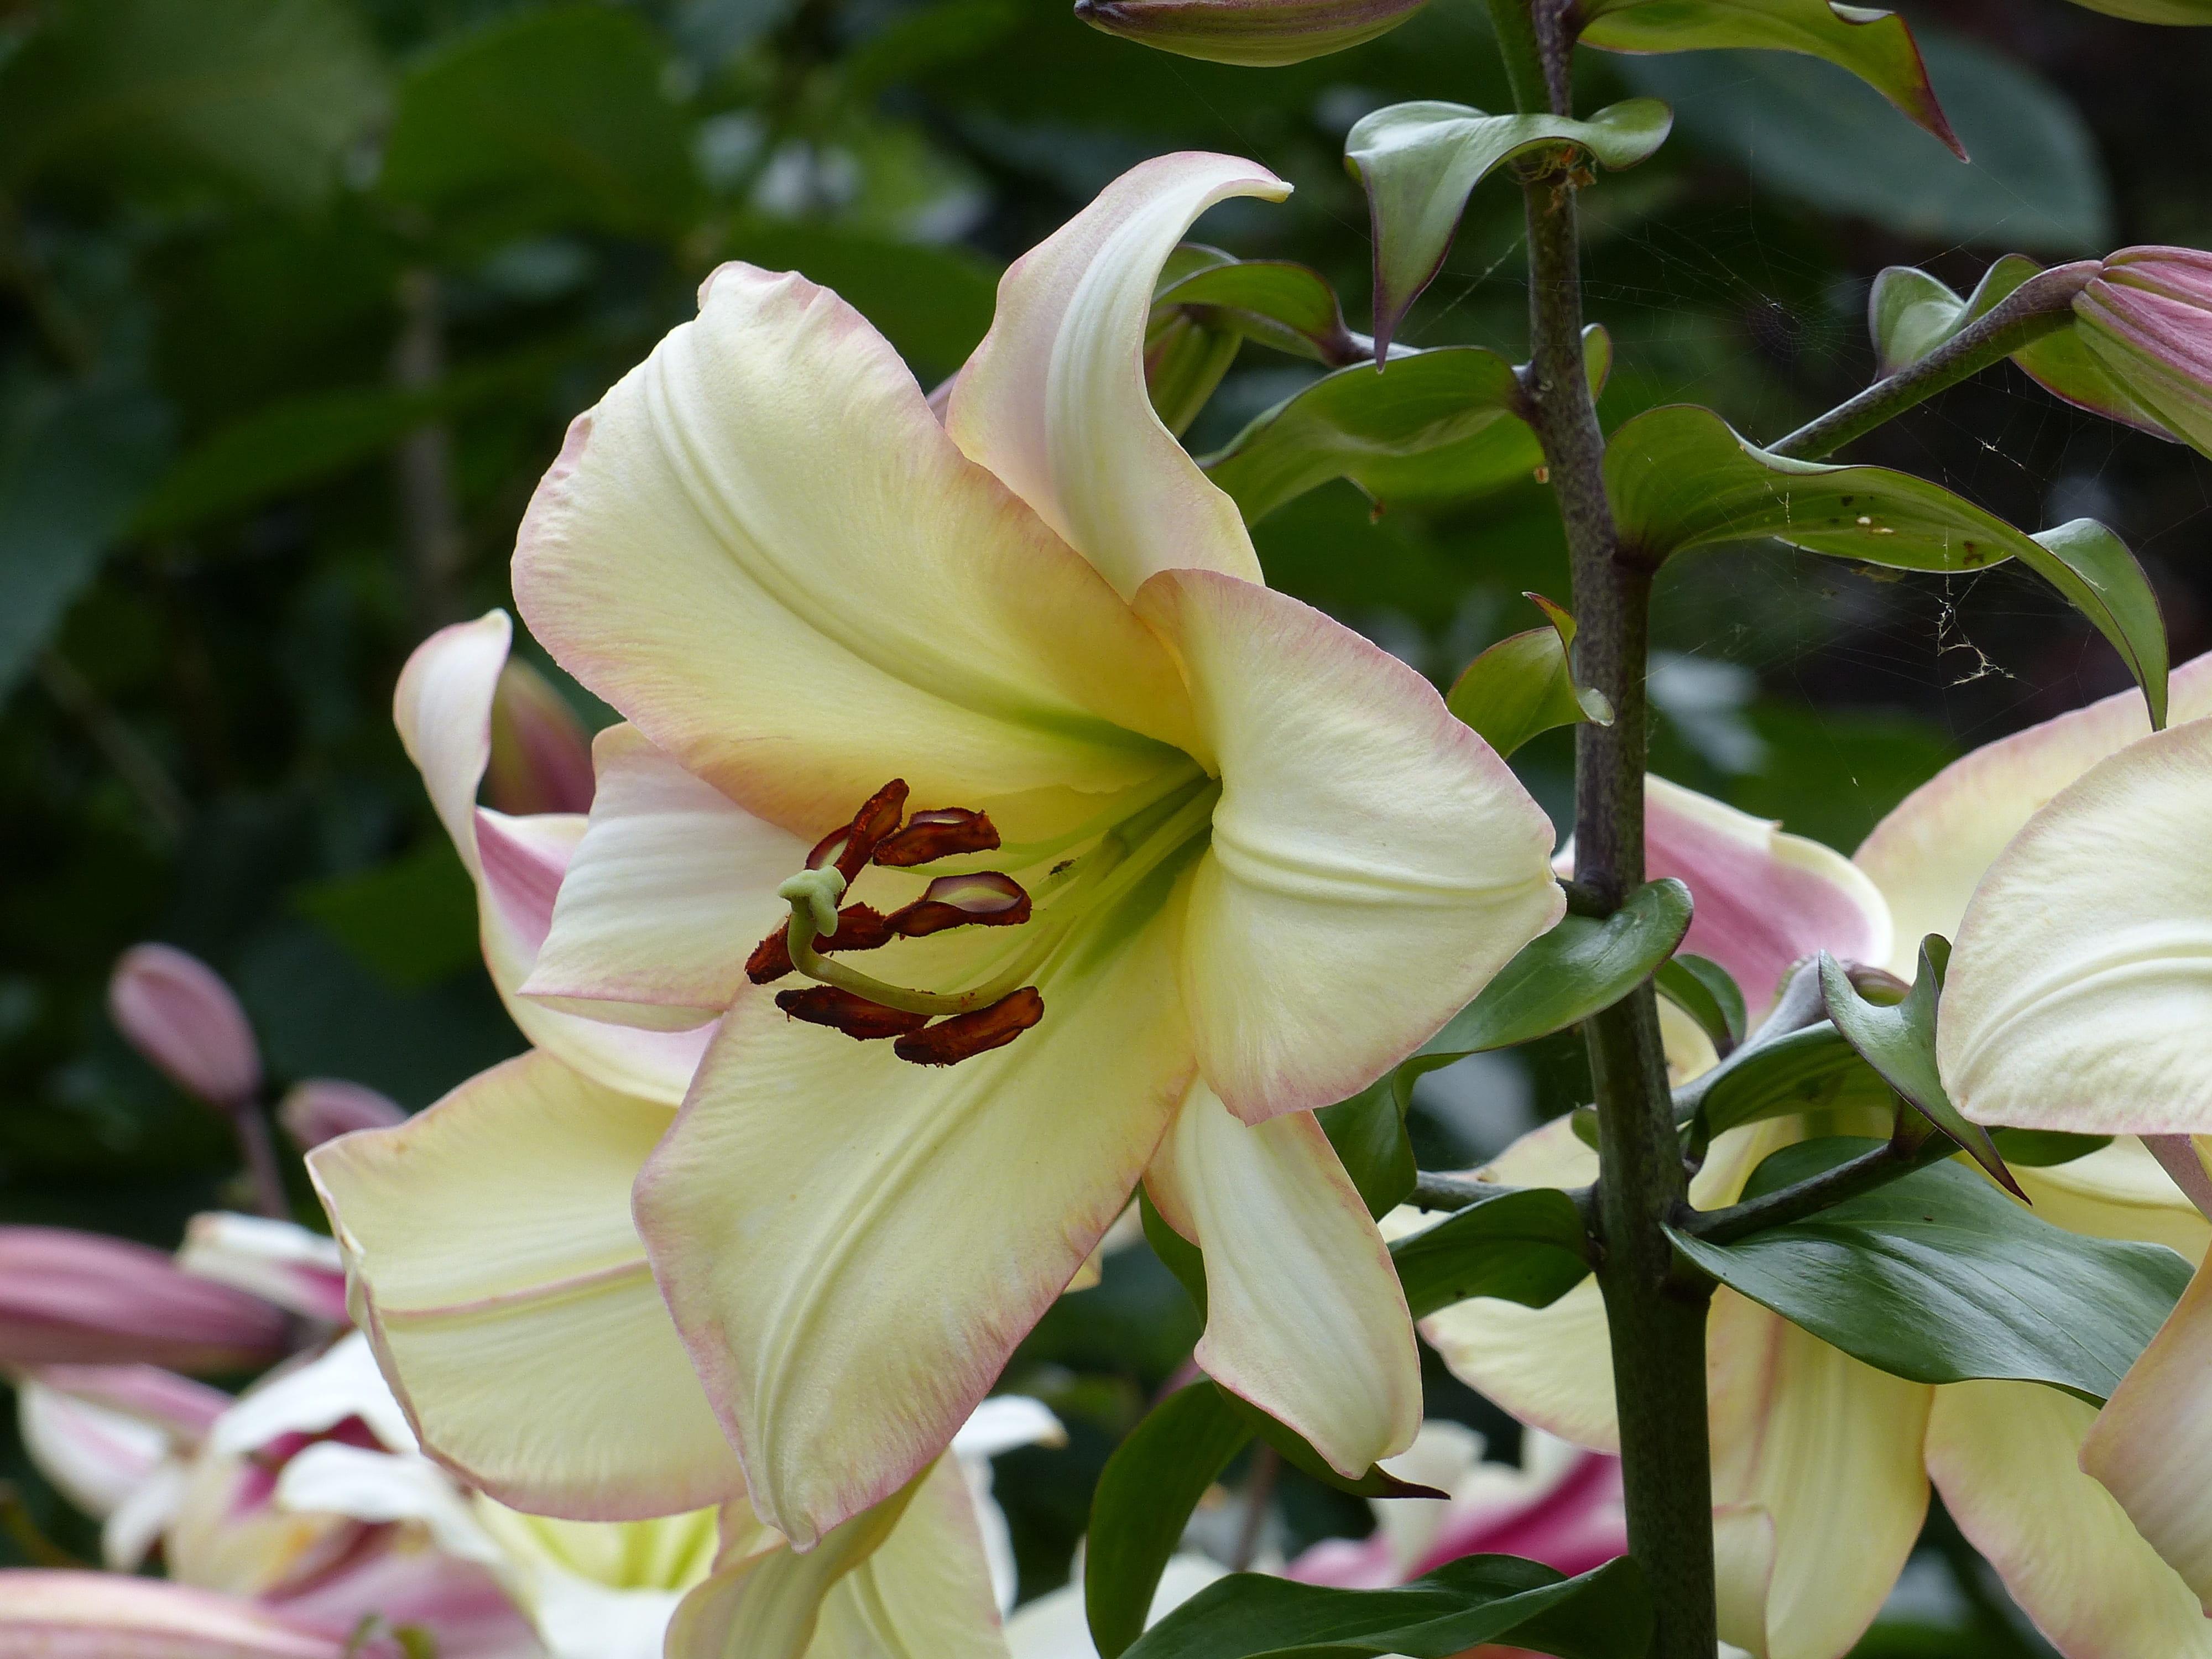 Lilies Oriental Trumpet 'Rising Moon' - Tree Lilies/Orienpet Lily (Shipping begins Jan. 2021) from Leo Berbee Bulb Company